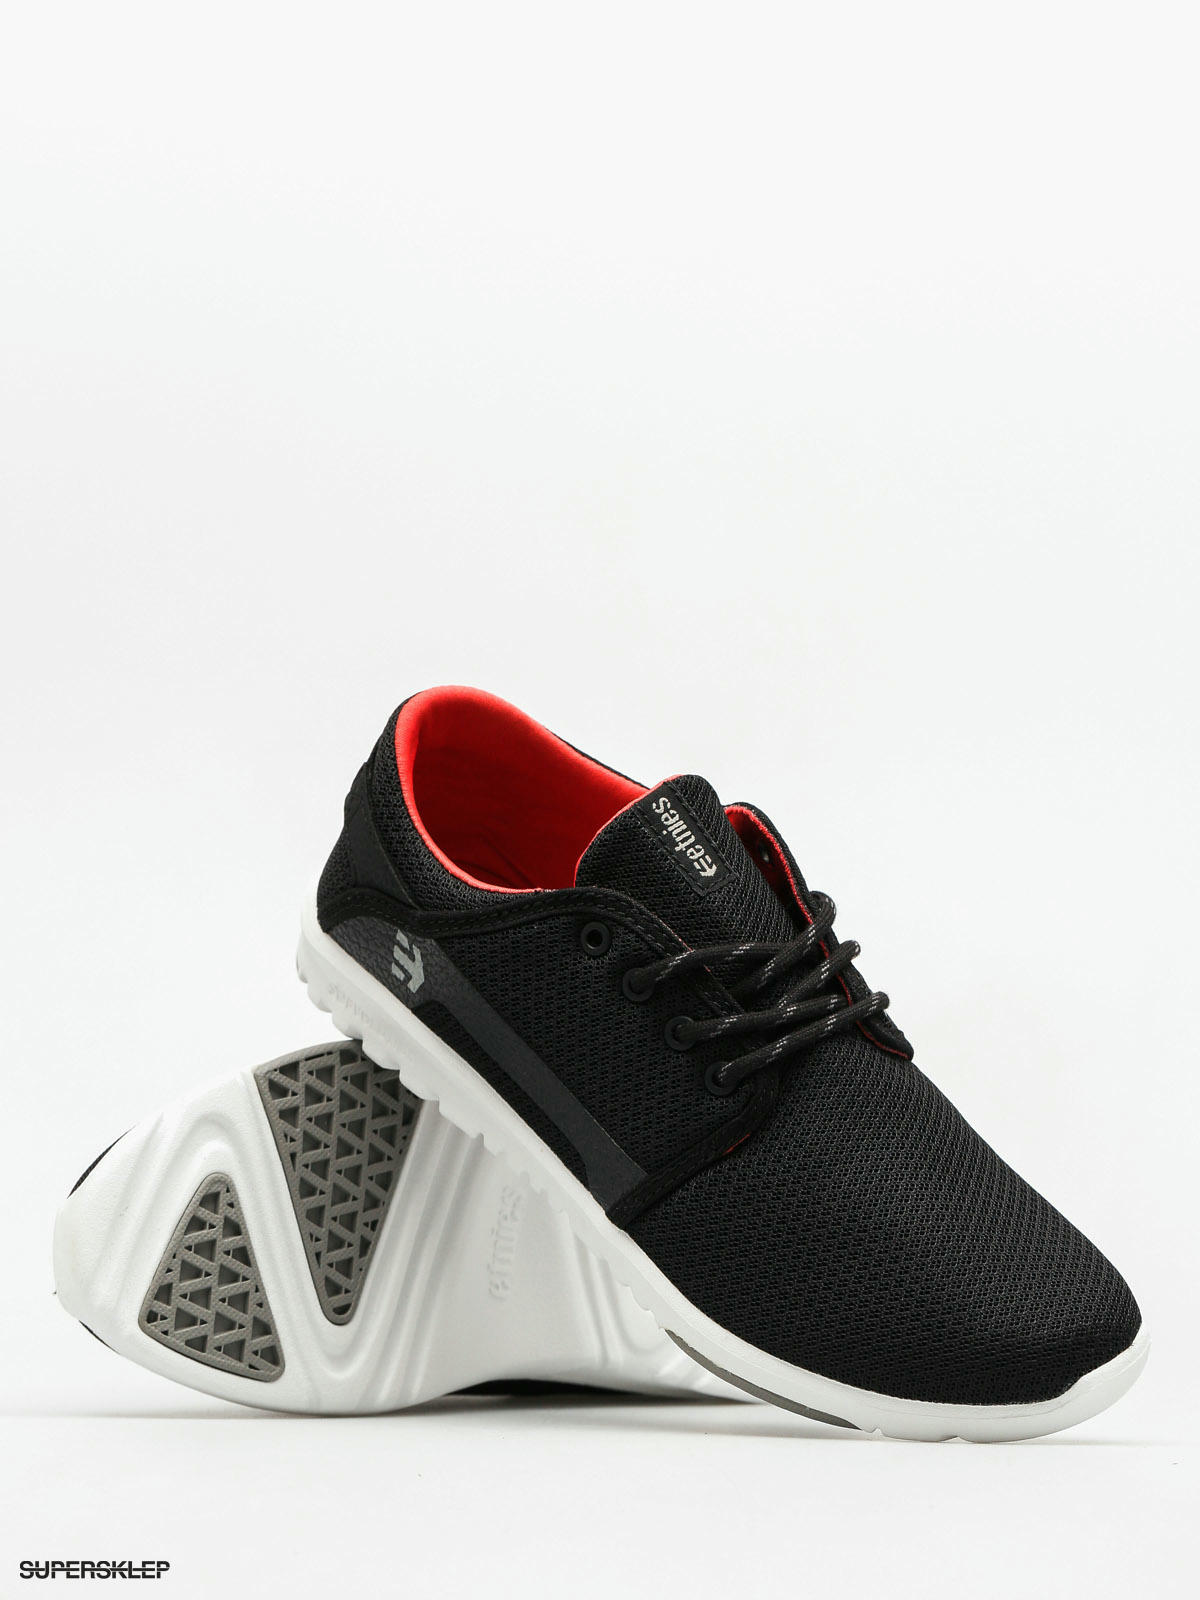 etnies scout red